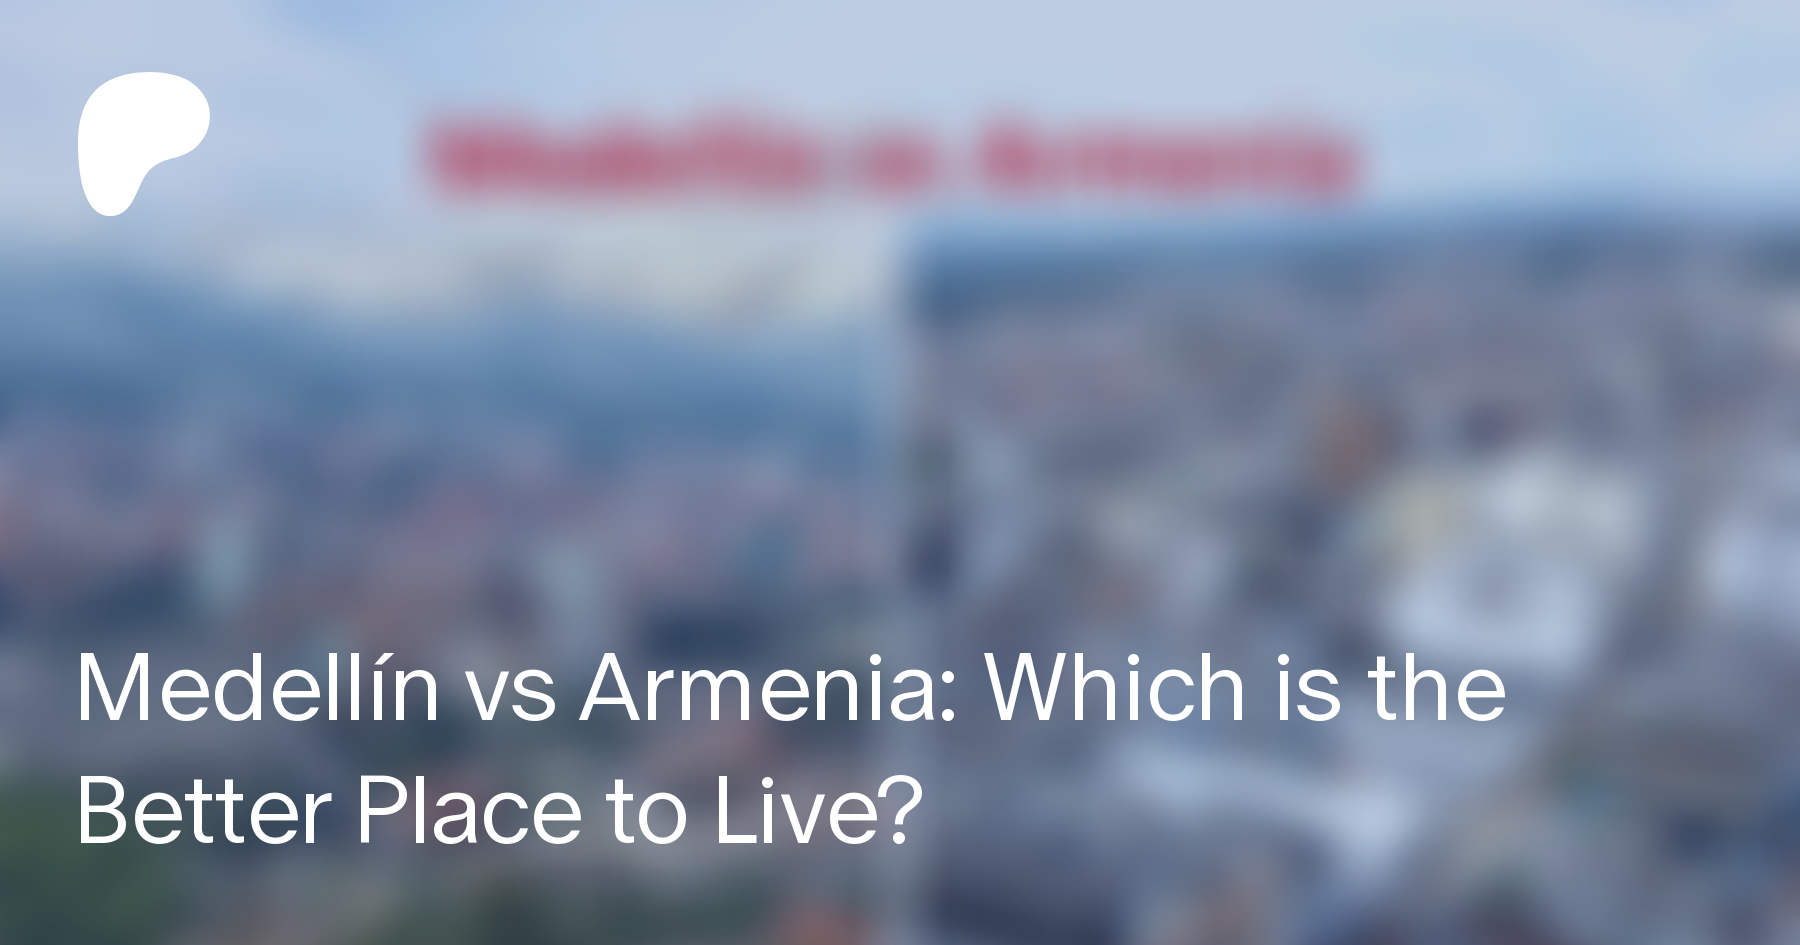 Medellín vs Armenia: Which is the Better Place to Live?